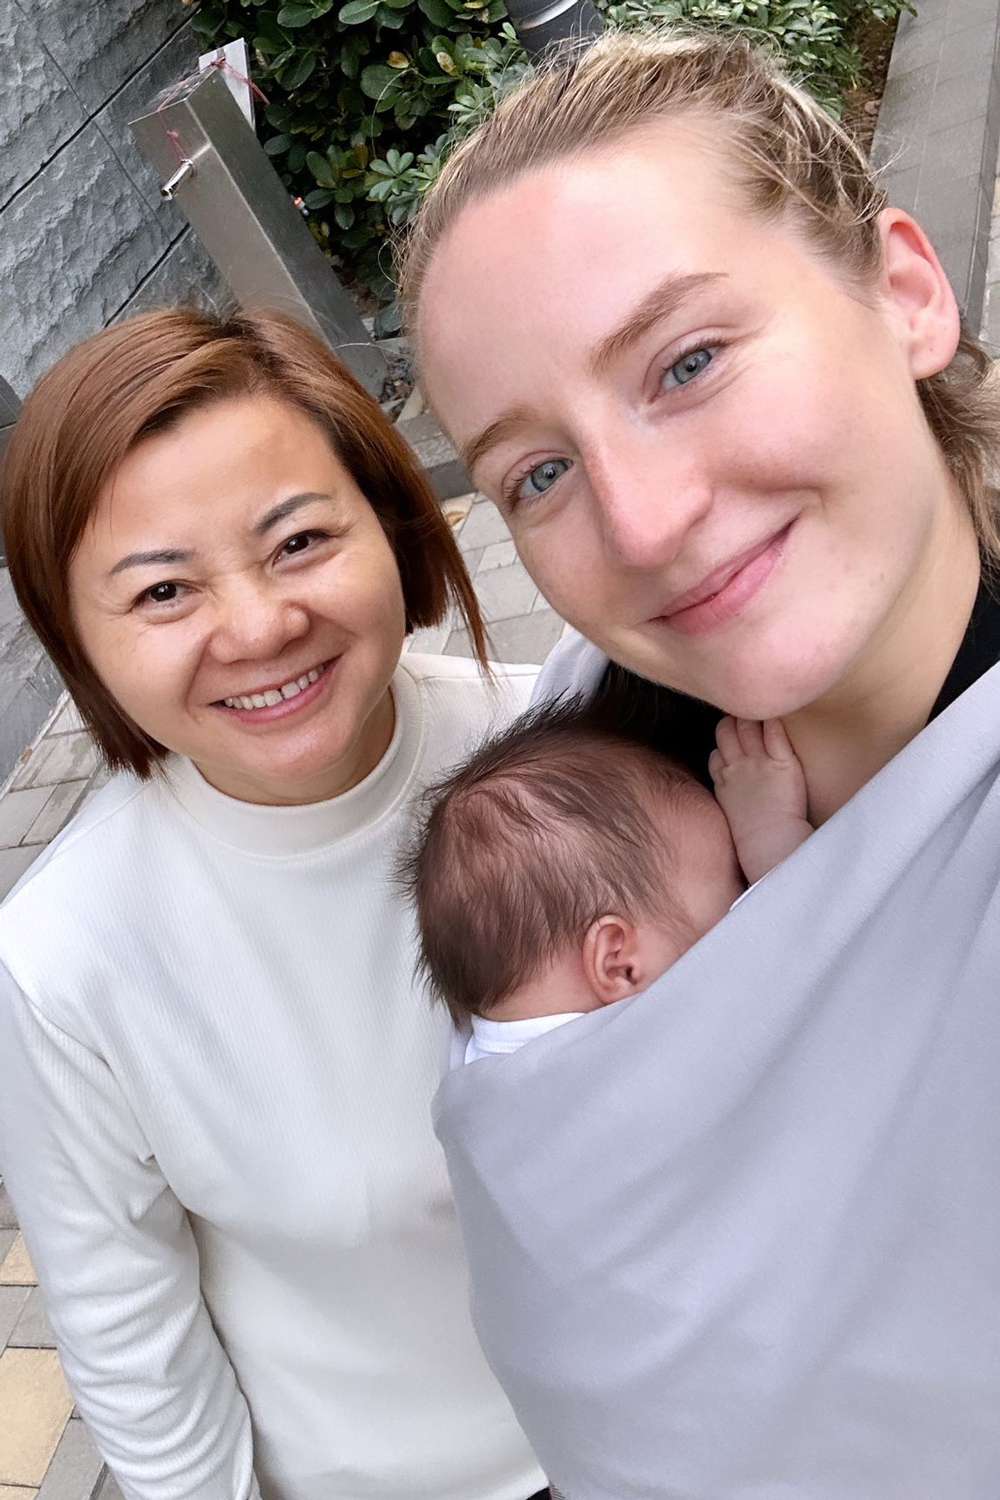 American Mom Living in Hong Kong Opens Up About How Having a Confinement Nurse Changed Her Maternity Experience